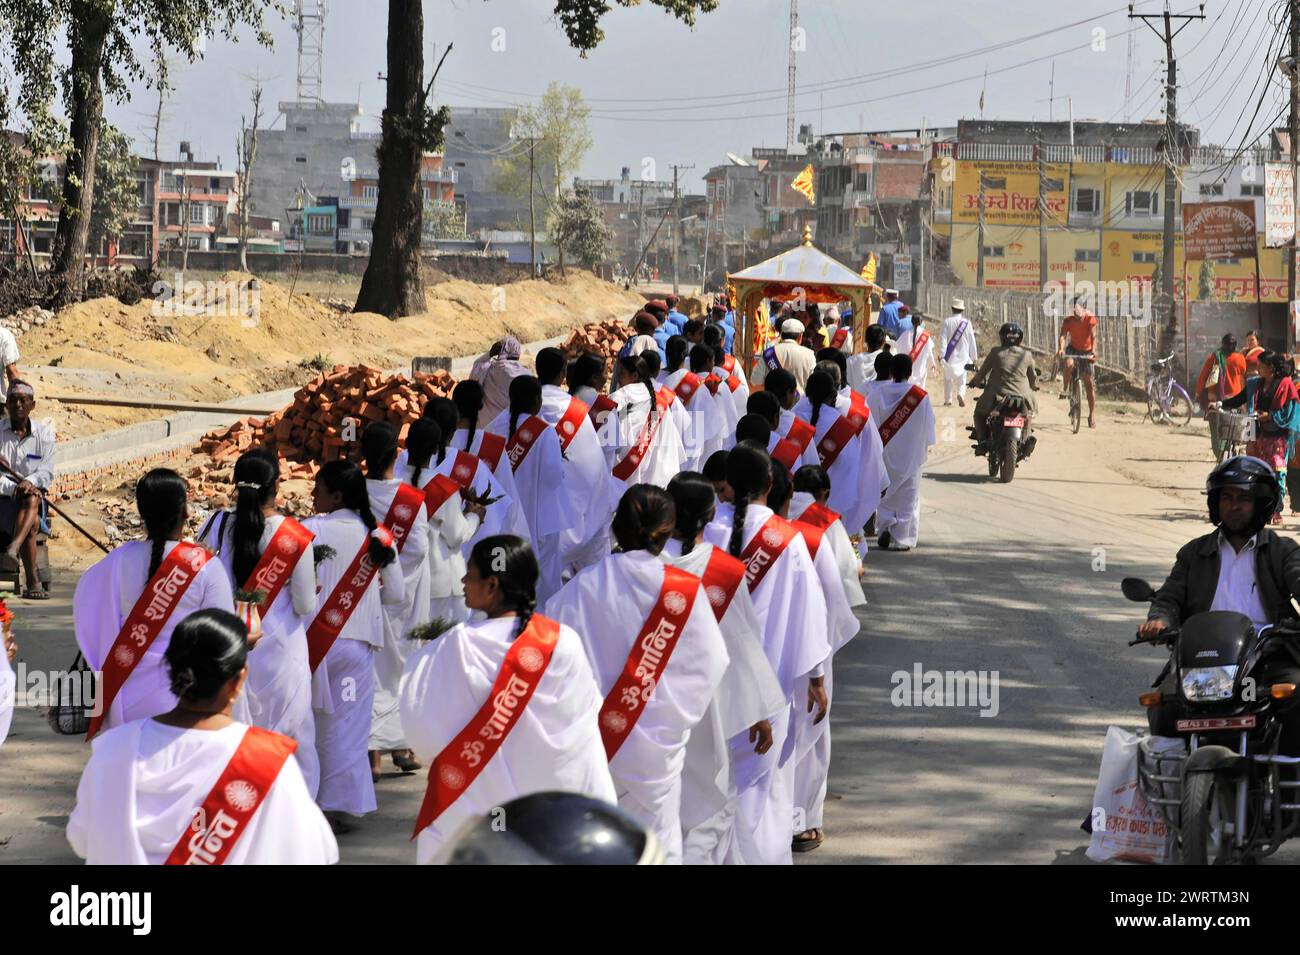 A procession of people in traditional dress with banners, Bhairahawa, Nepal Stock Photo